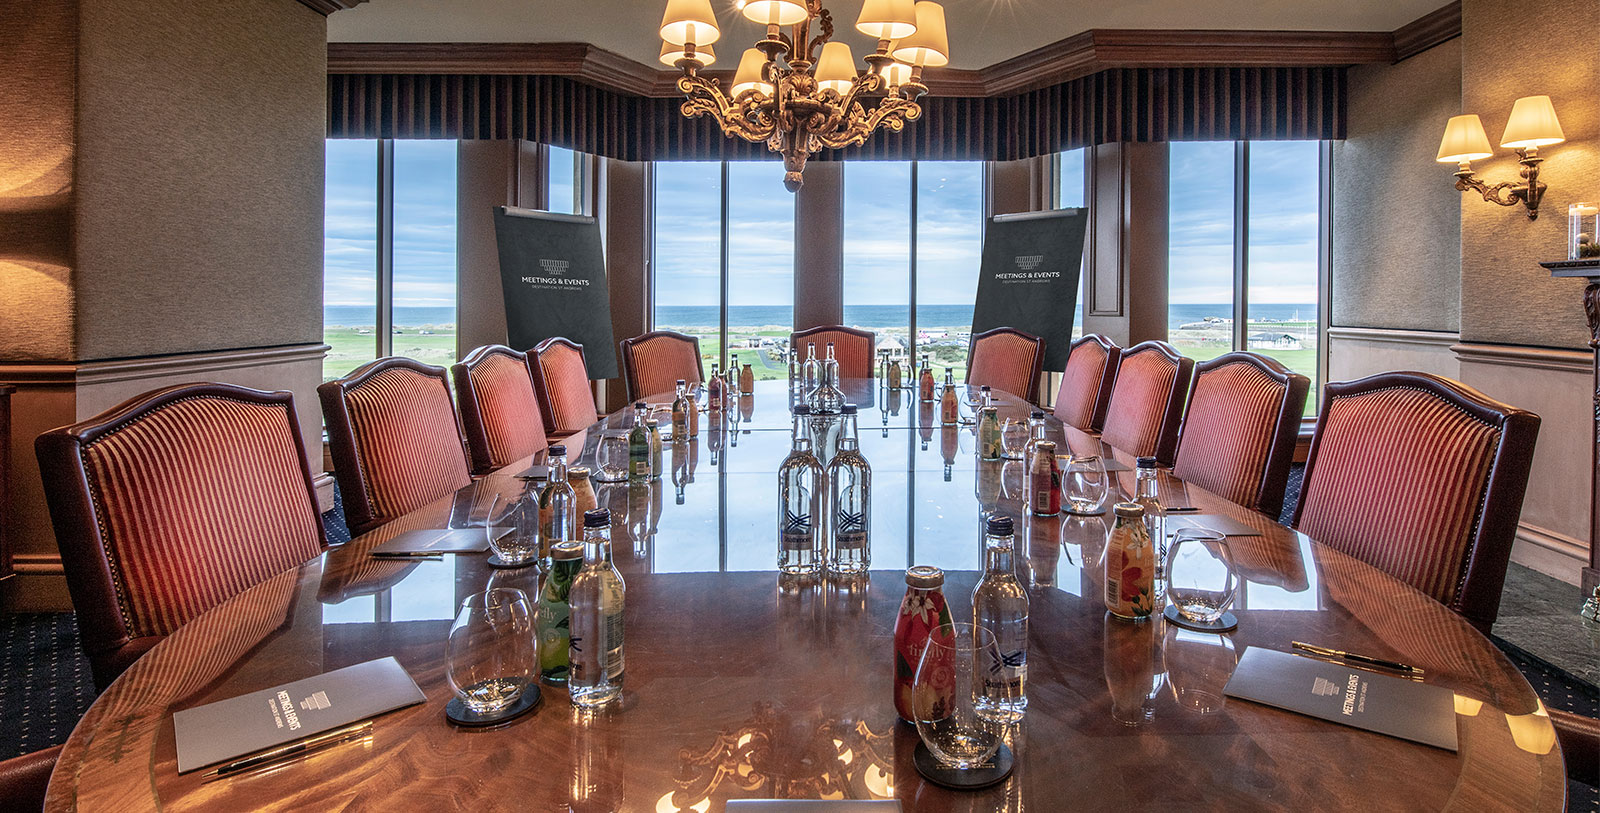 Image of Boardroom at Old Course Hotel Golf Resort & Spa Scotland United Kingdom, Request For Proposal